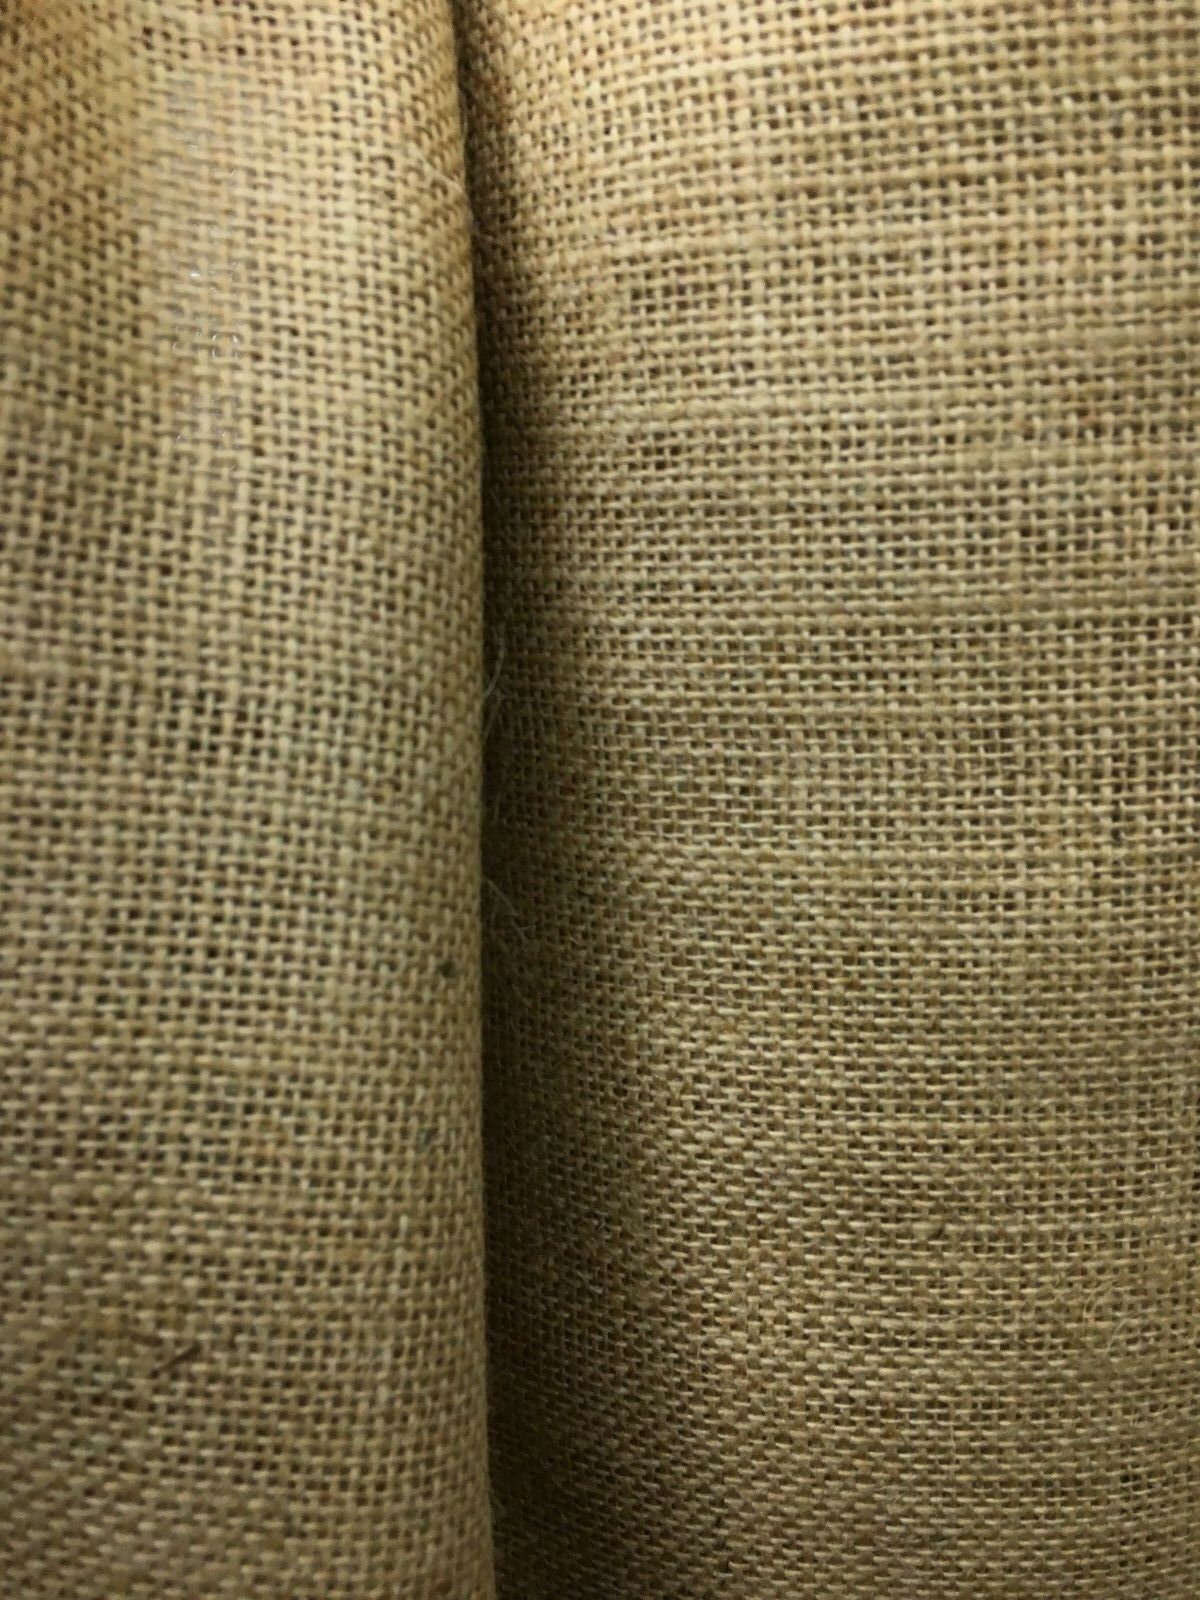 NATURAL JUTE Burlap Fabric (60 in.) Sold By The Yard